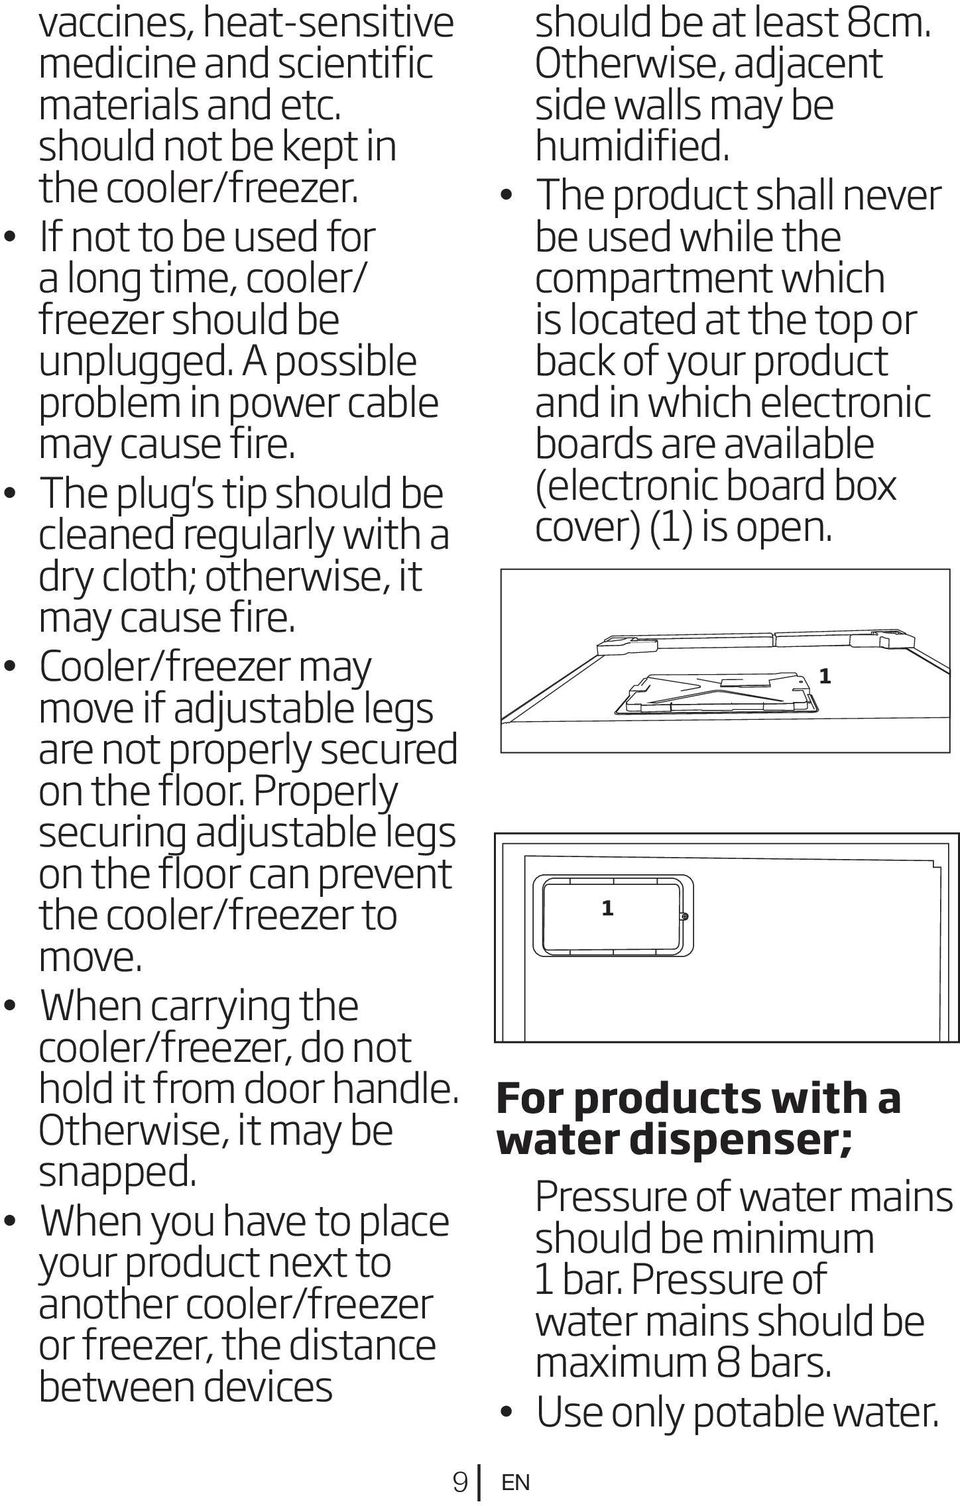 Cooler/freezer may move if adjustable legs are not properly secured on the floor. Properly securing adjustable legs on the floor can prevent the cooler/freezer to move.